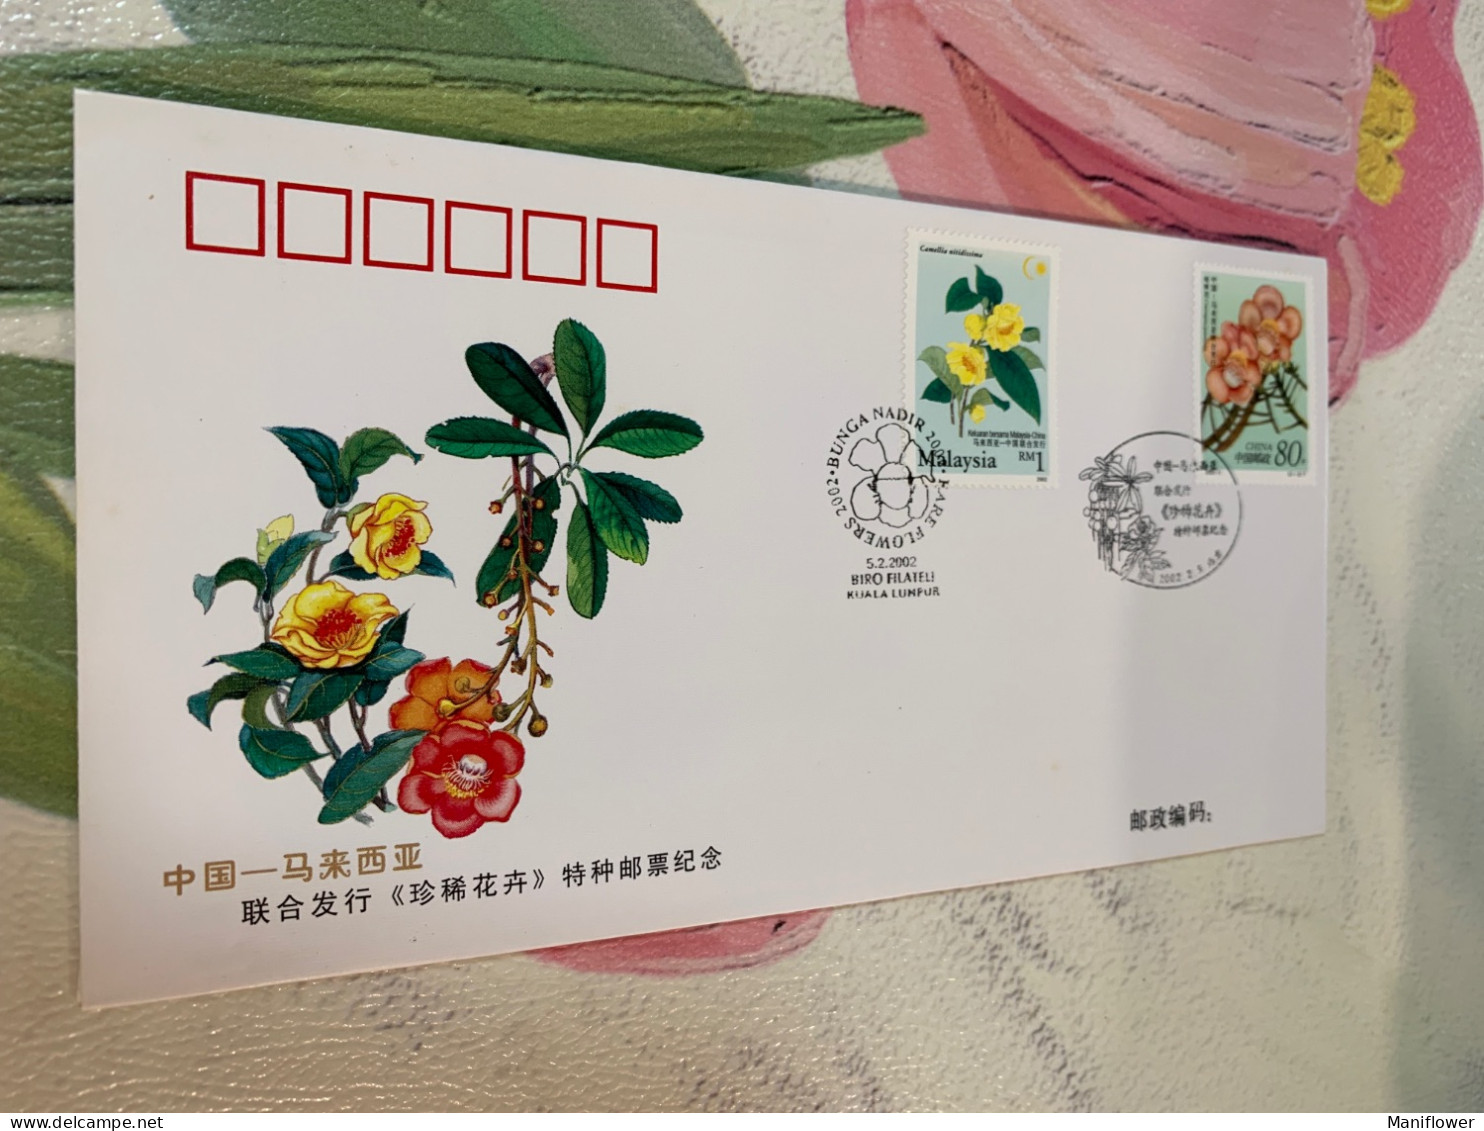 China Stamp FDC 2002 Joint Issued Malaysia Rare Flower - Covers & Documents